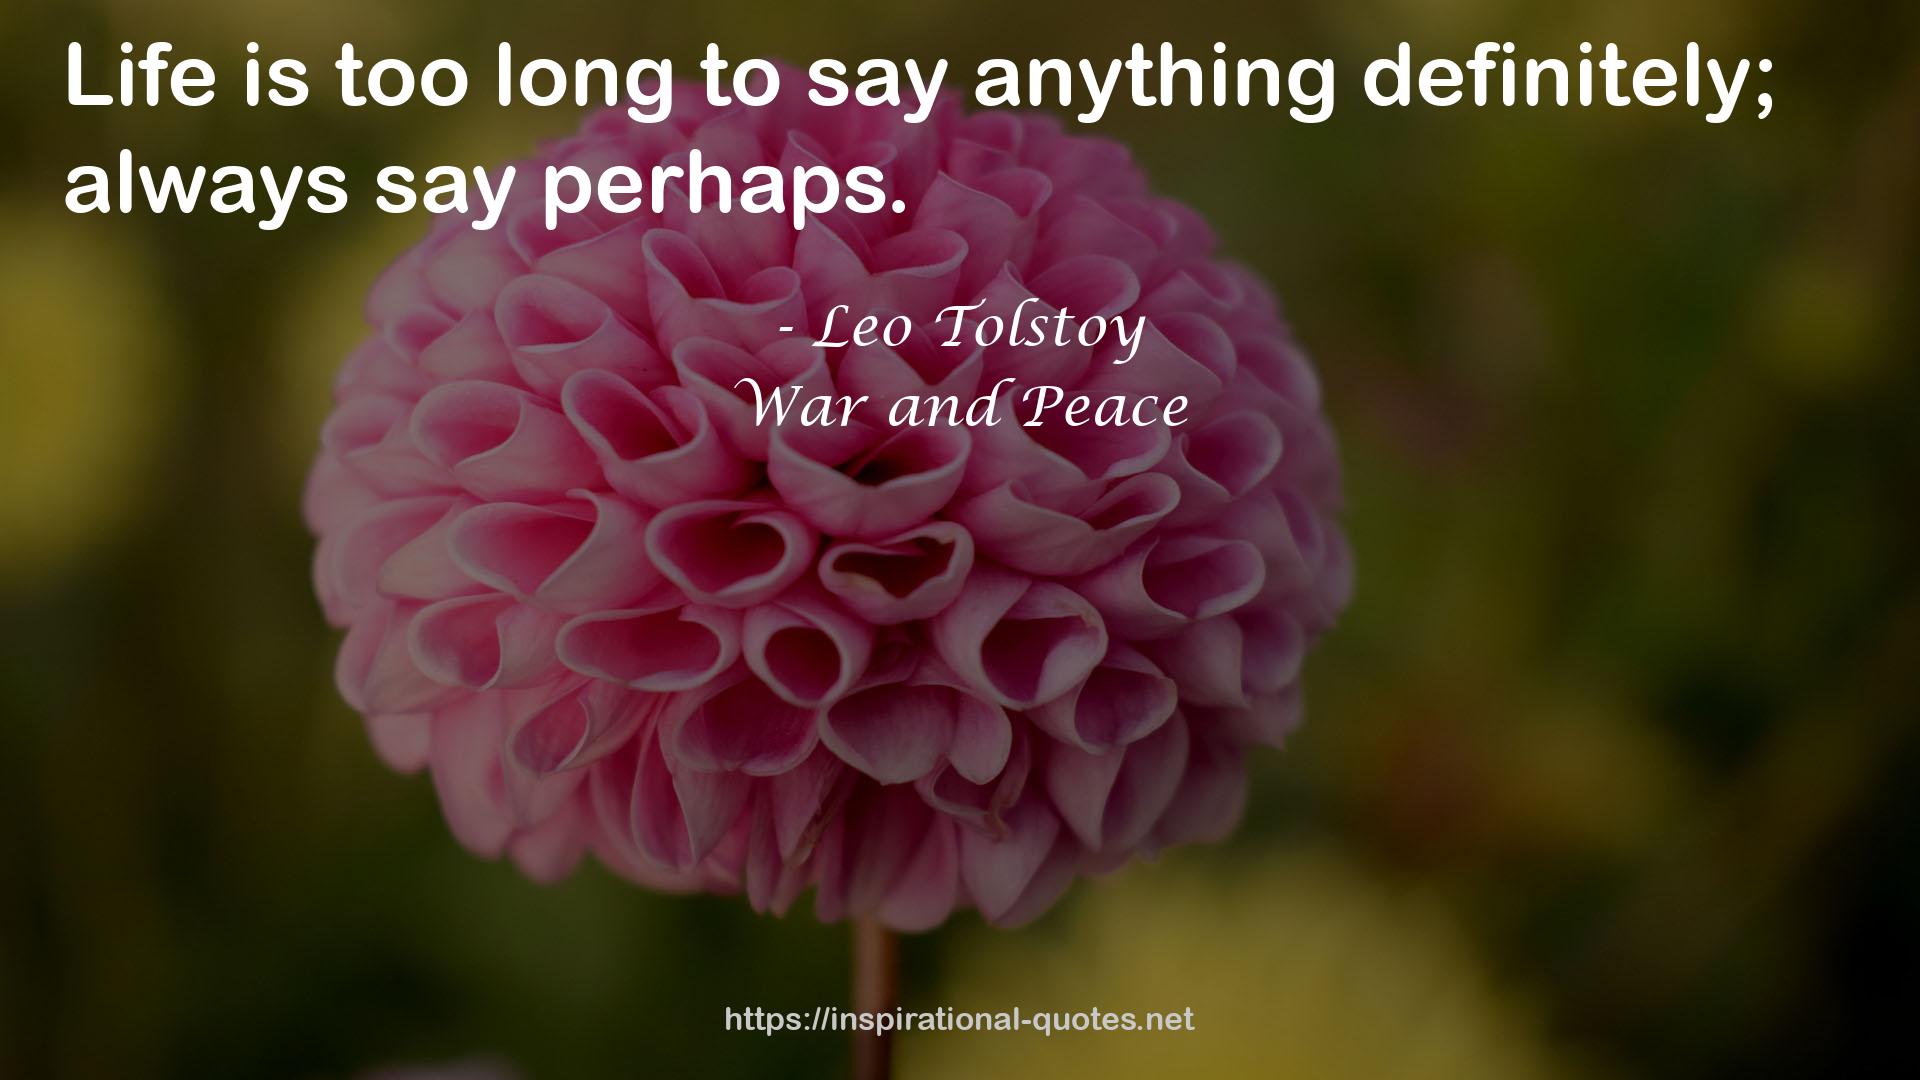 War and Peace QUOTES